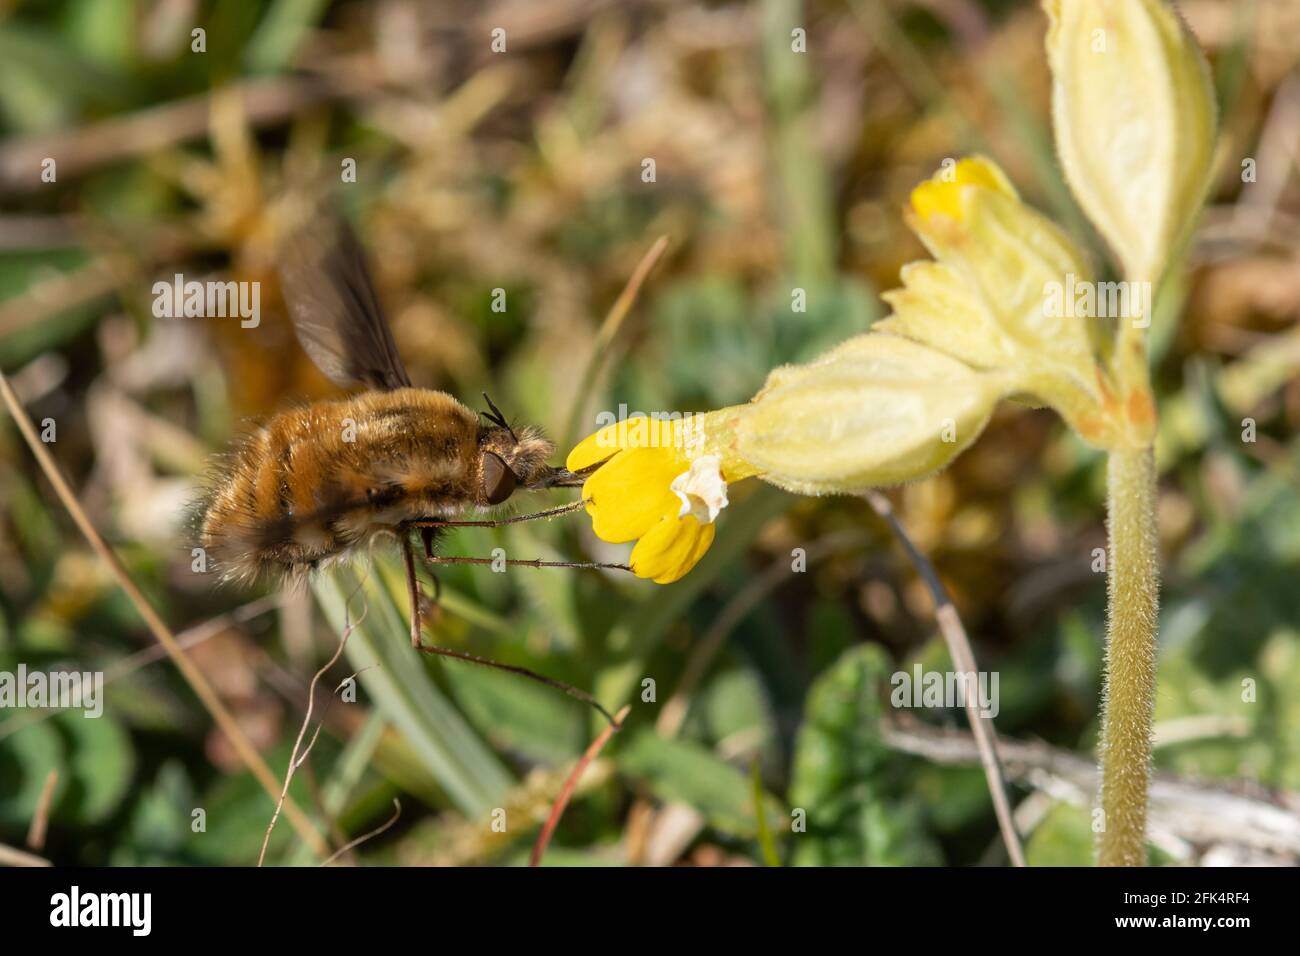 Dark-edged bee-fly (Bombylius major), also called large bee-fly, feeding on nectar from a cowslip (Primula veris) during spring, UK Stock Photo